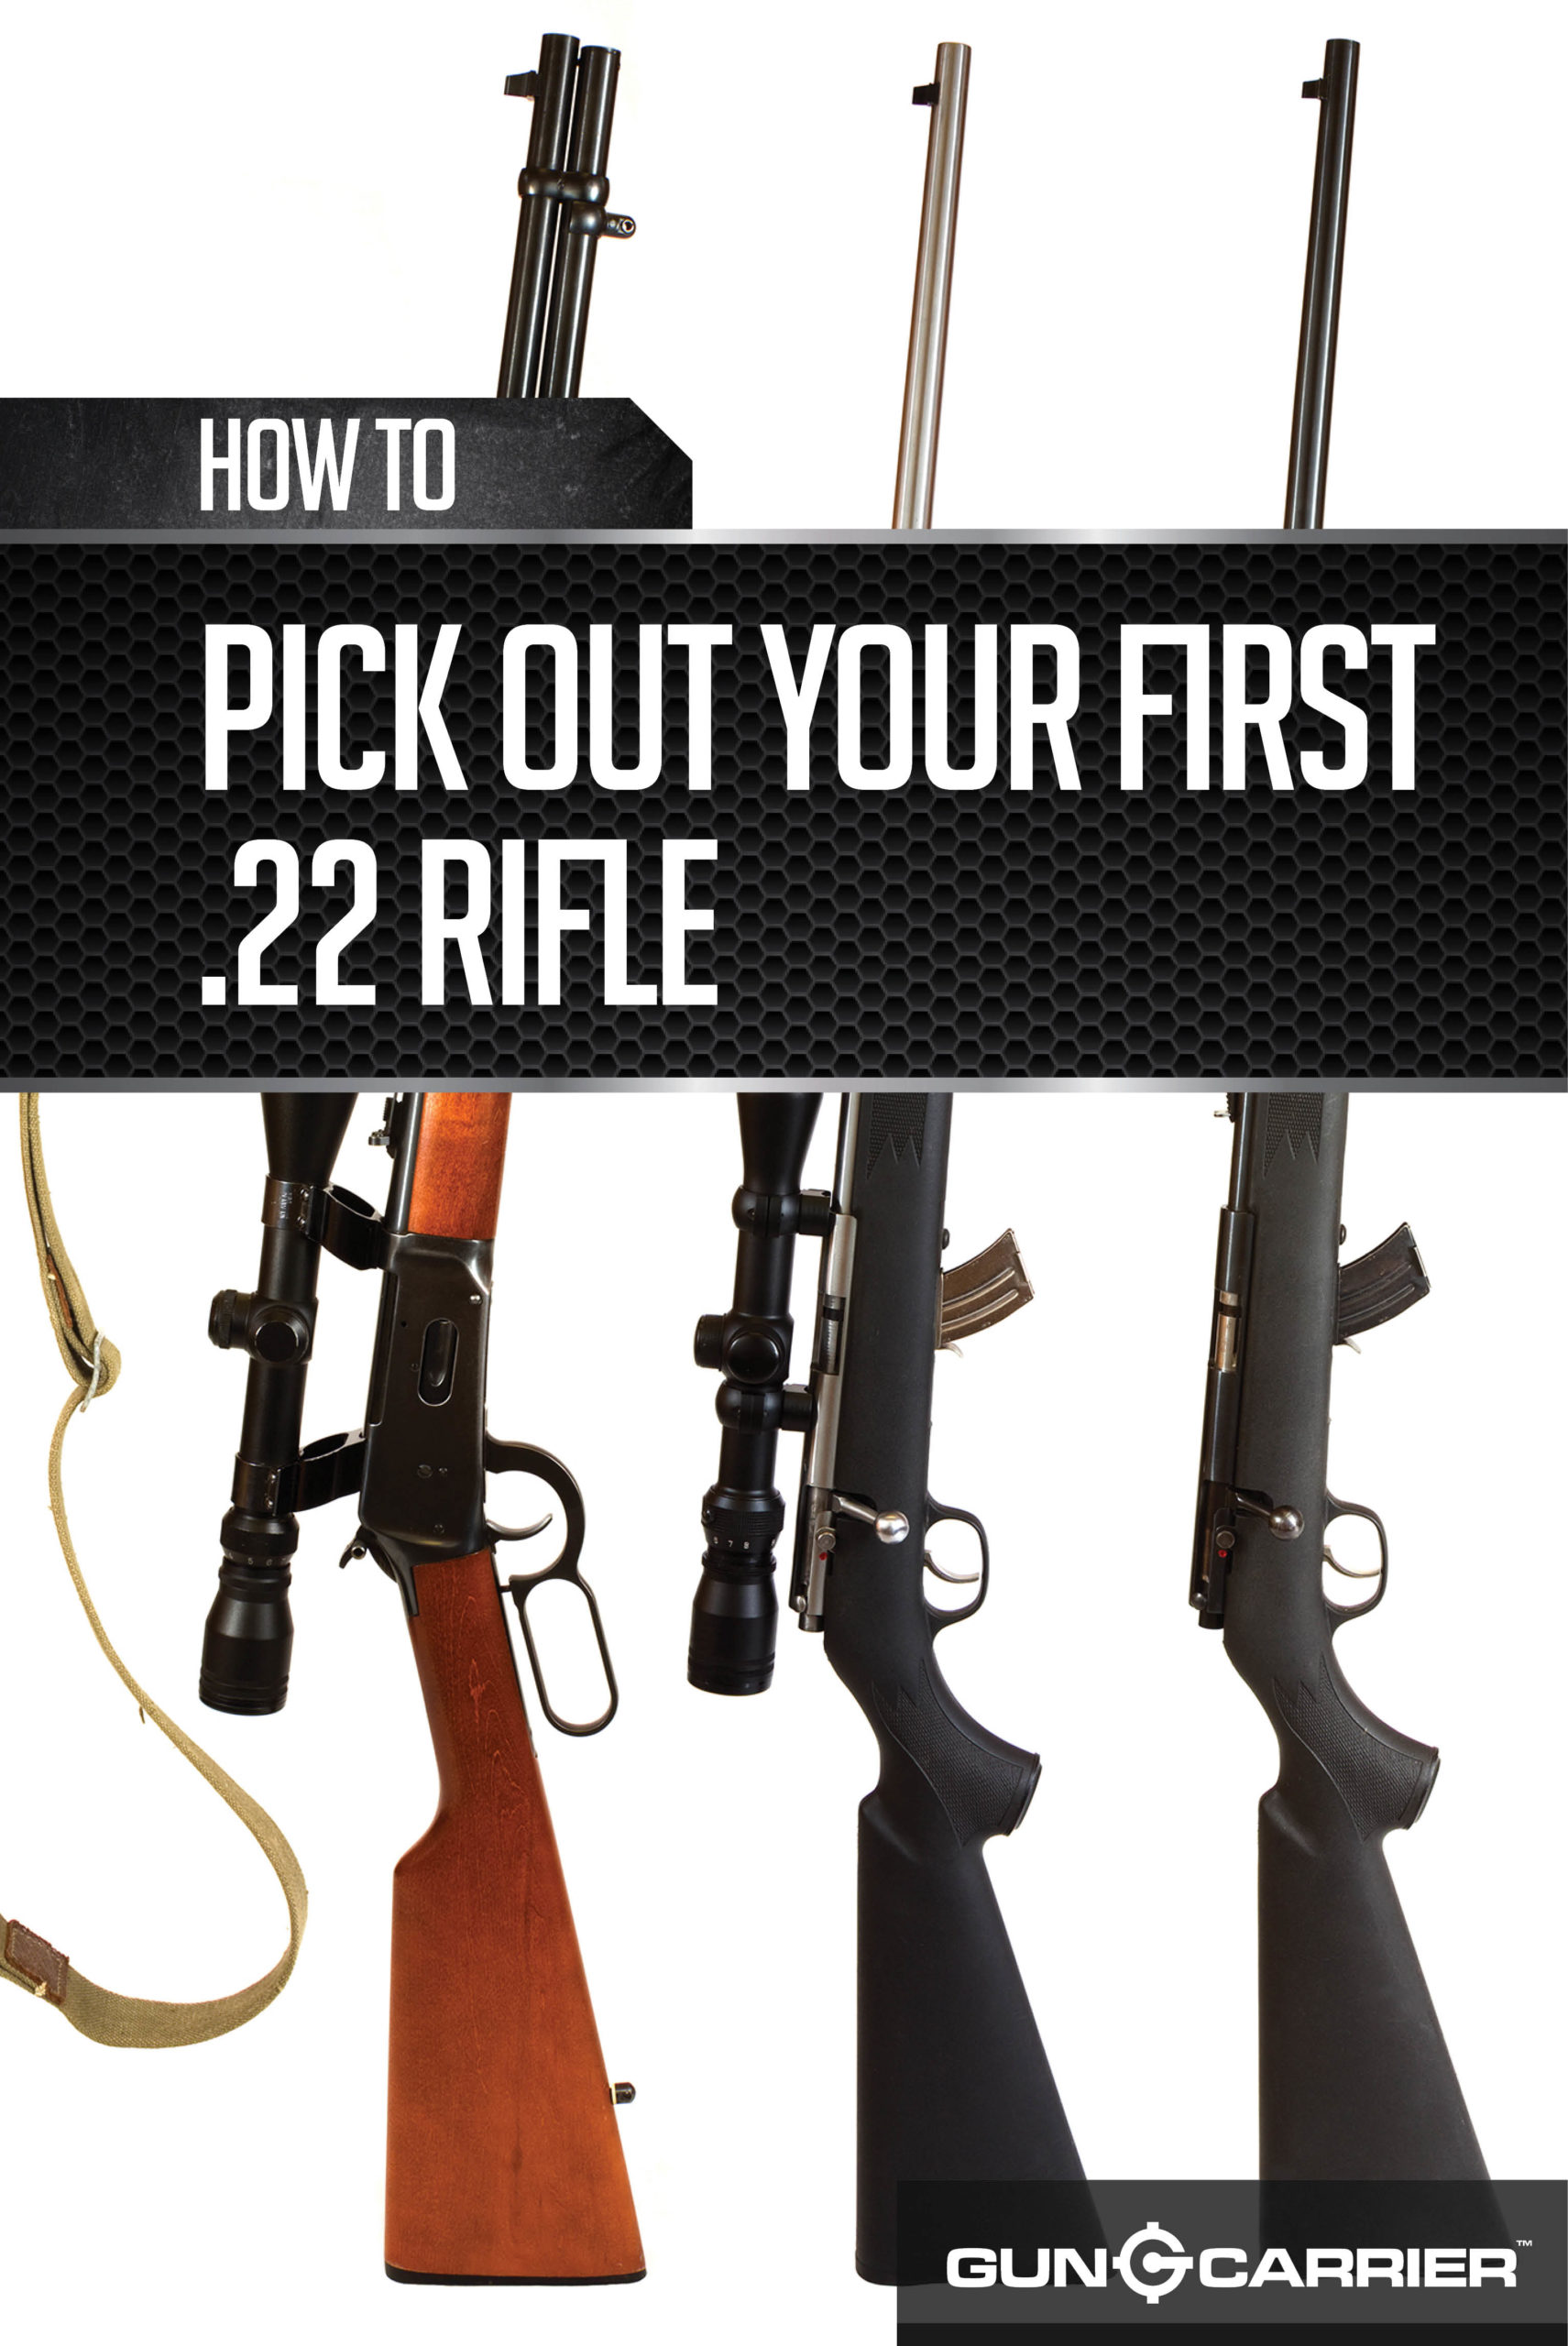 Picking your First 22 Rifle by Gun Carrier at https://guncarrier.com/picking-your-first-22-rifle/